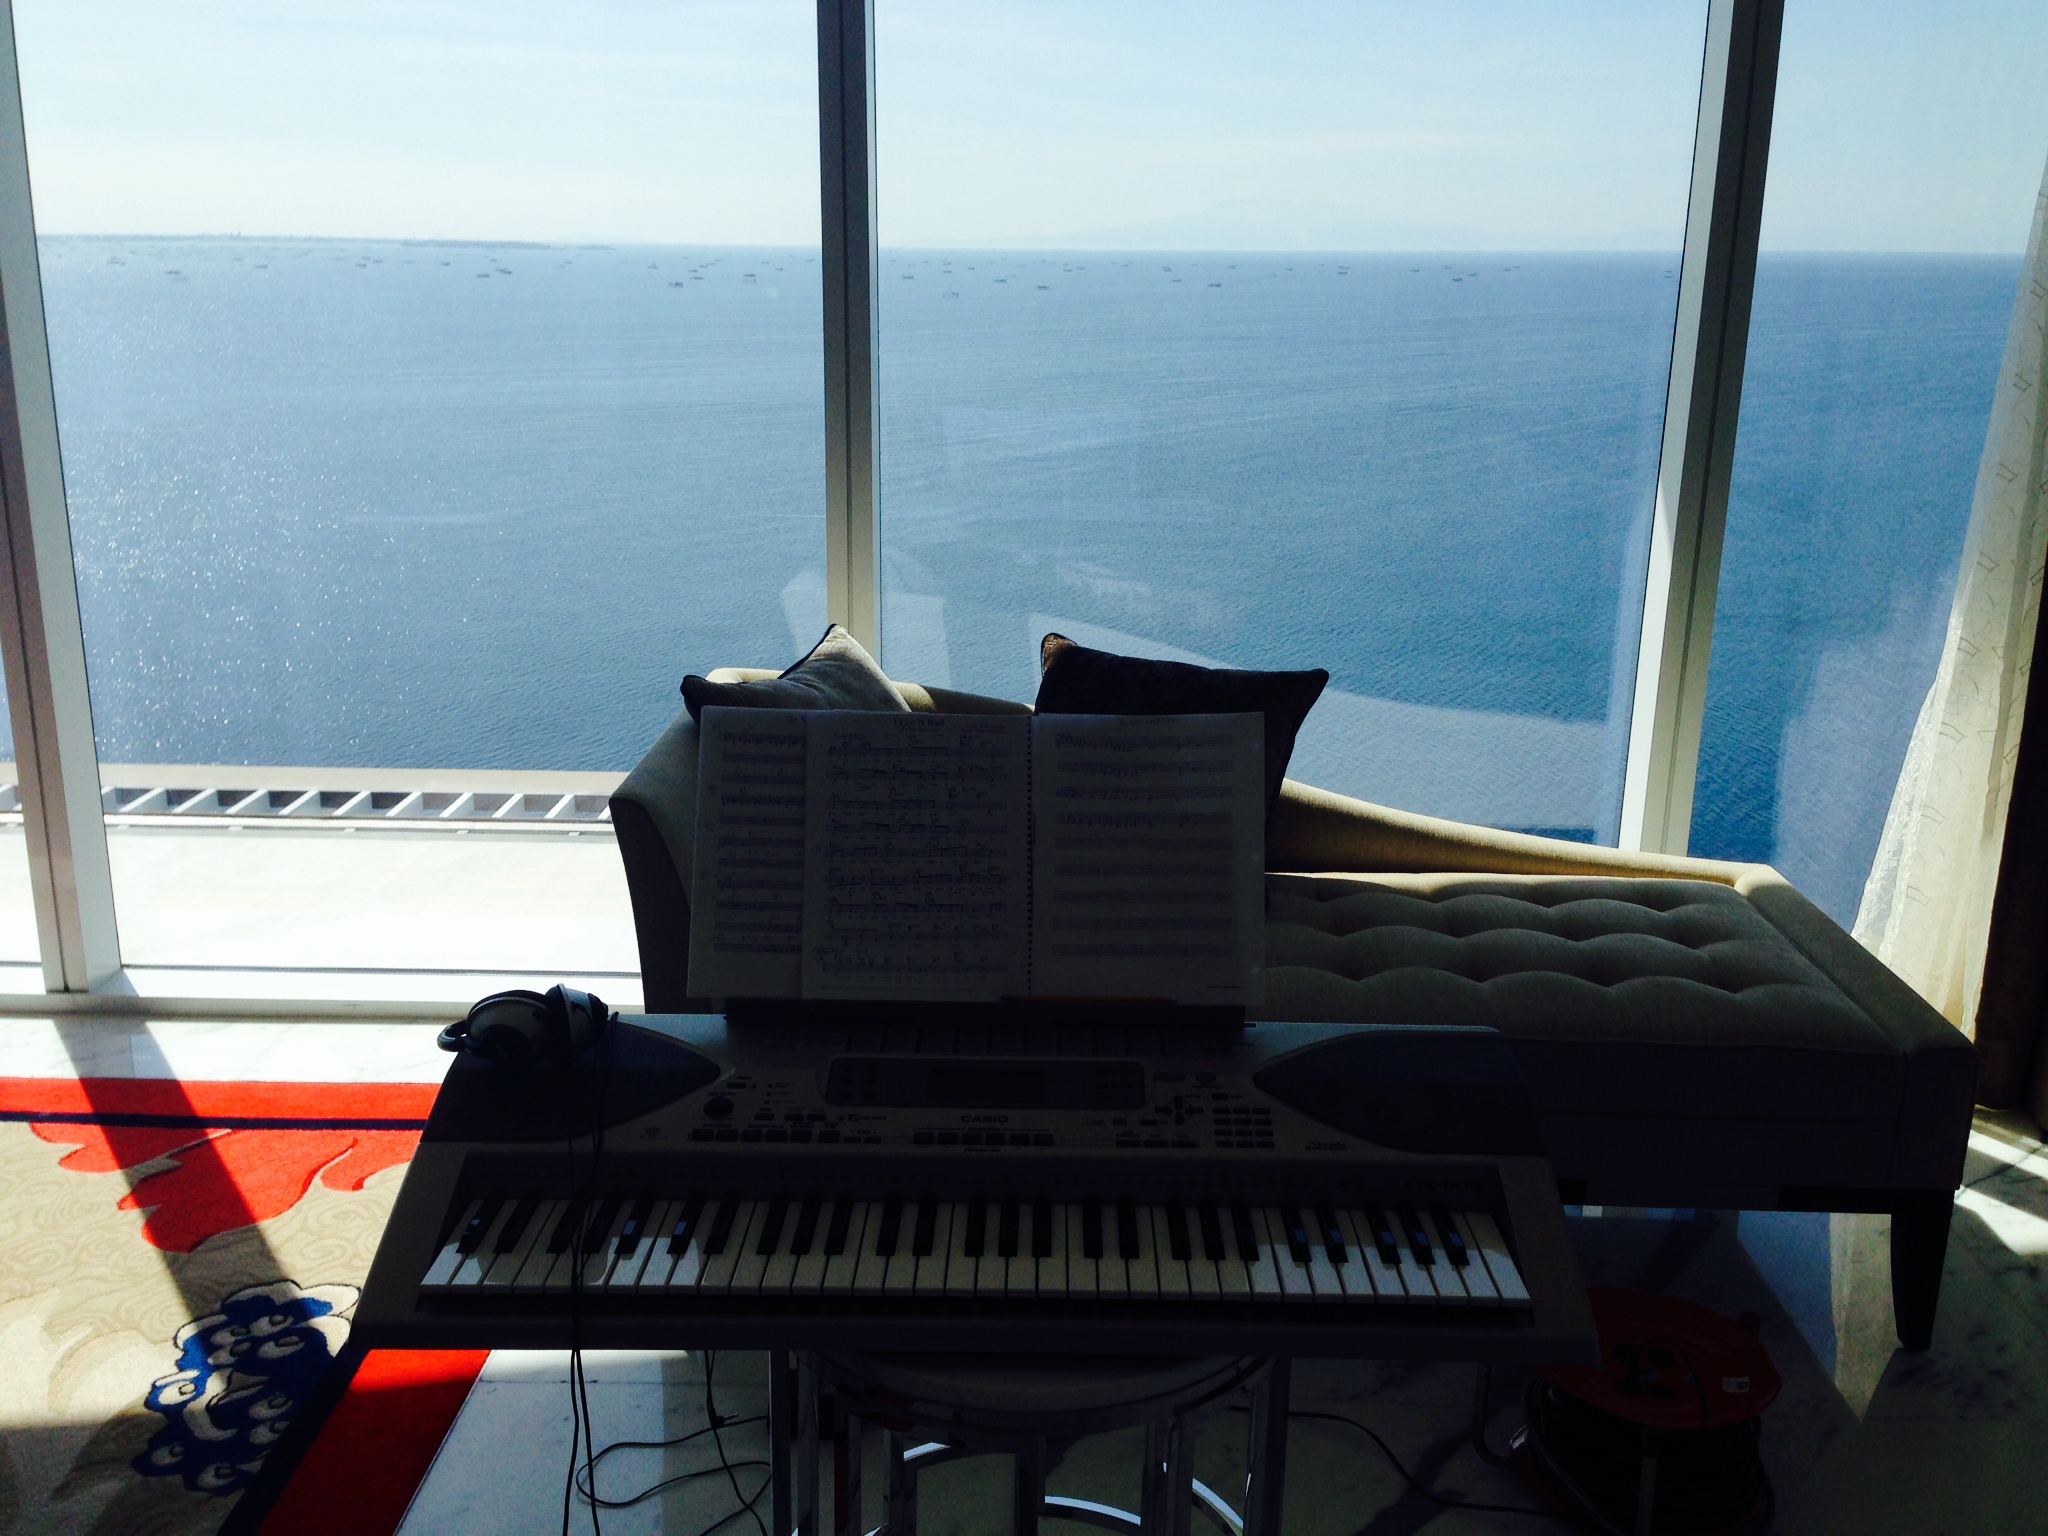 Songwriting with a breath-taking view.